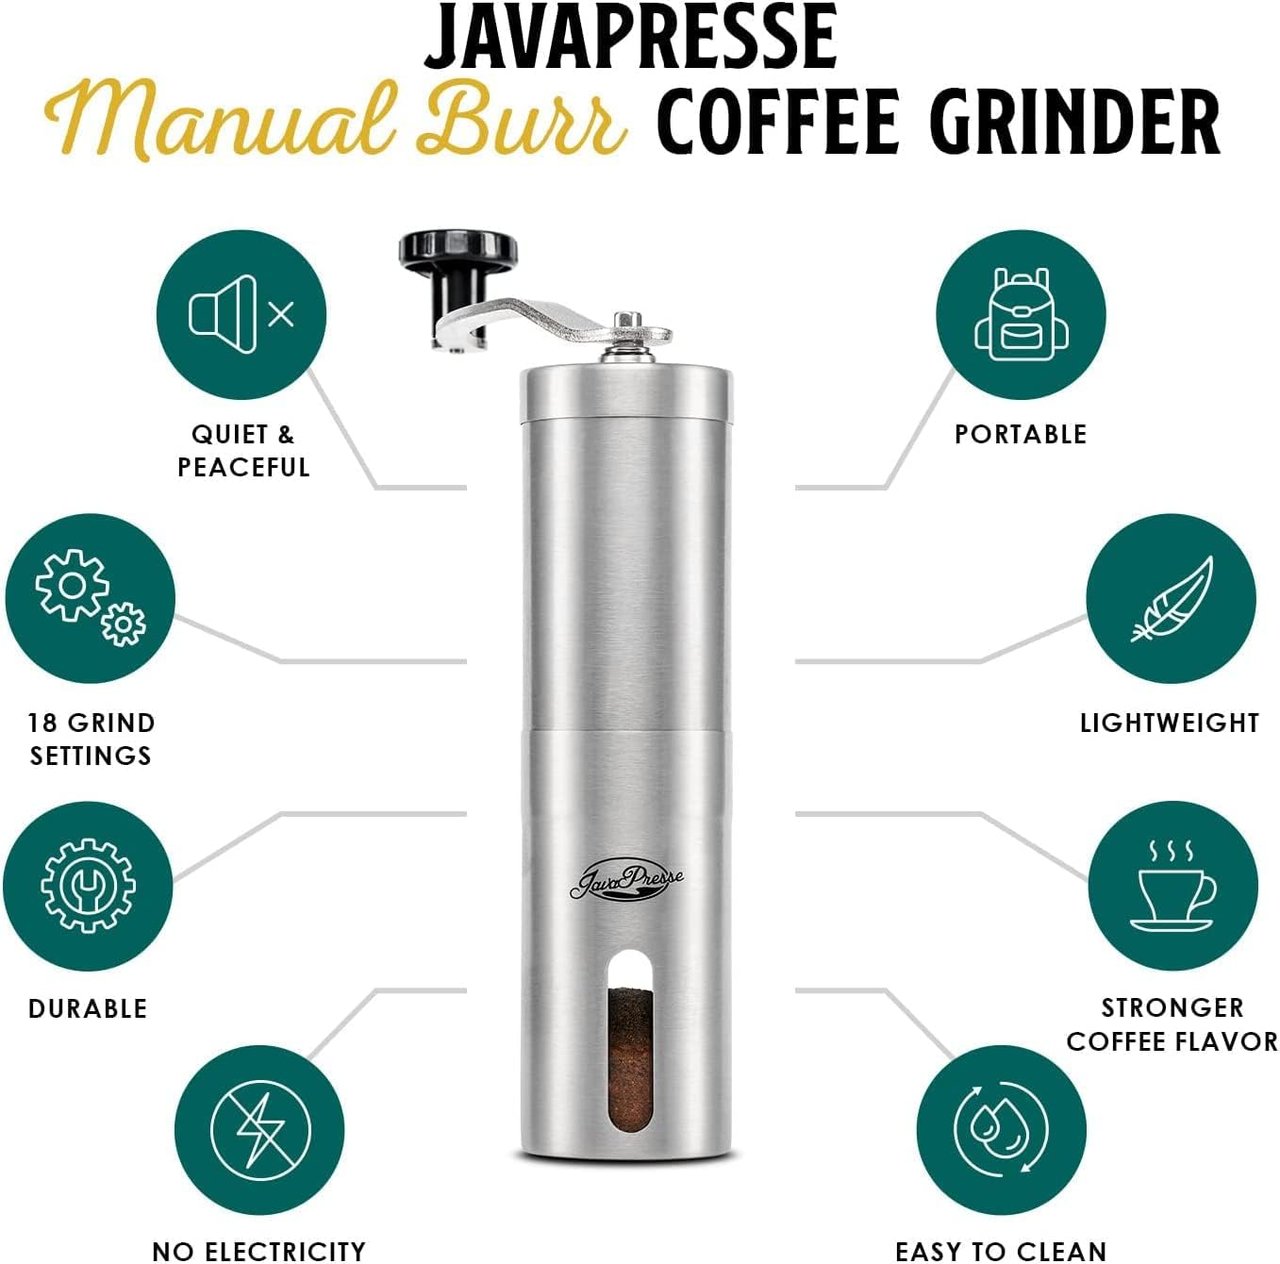 2 JavaPresse's Manual Coffee Grinder - Precision Coffee Bean Grinder with 18 Customizable Grind Levels, Premium Stainless Steel Manual Burr Coffee Grinder with Hand Crank - Exceptional Present, Ideal for Outdoor Adventures.